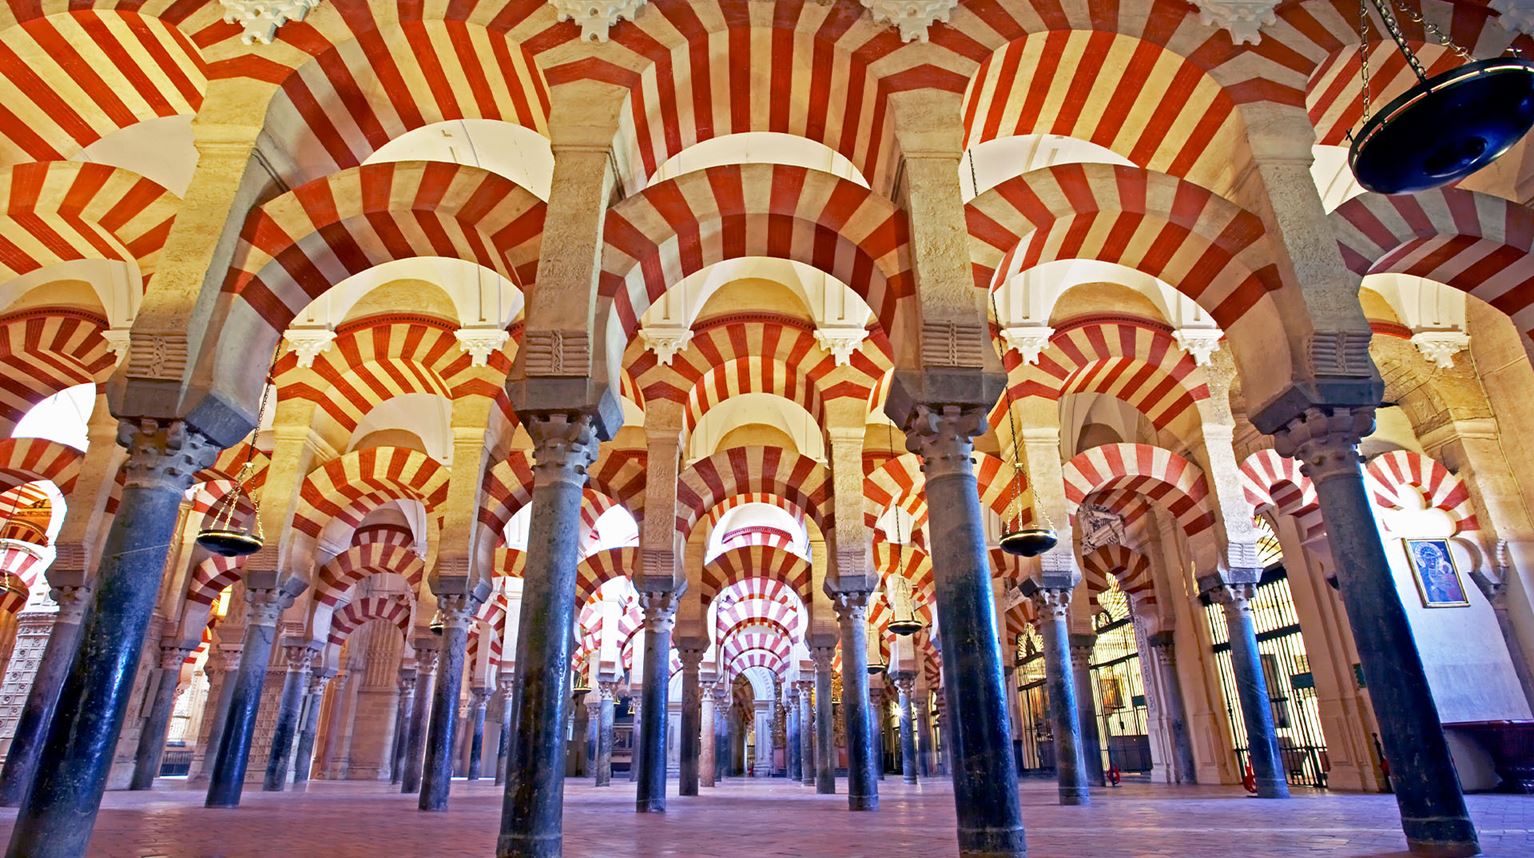 Red striped ceiling of the Great Mosque of Córdoba